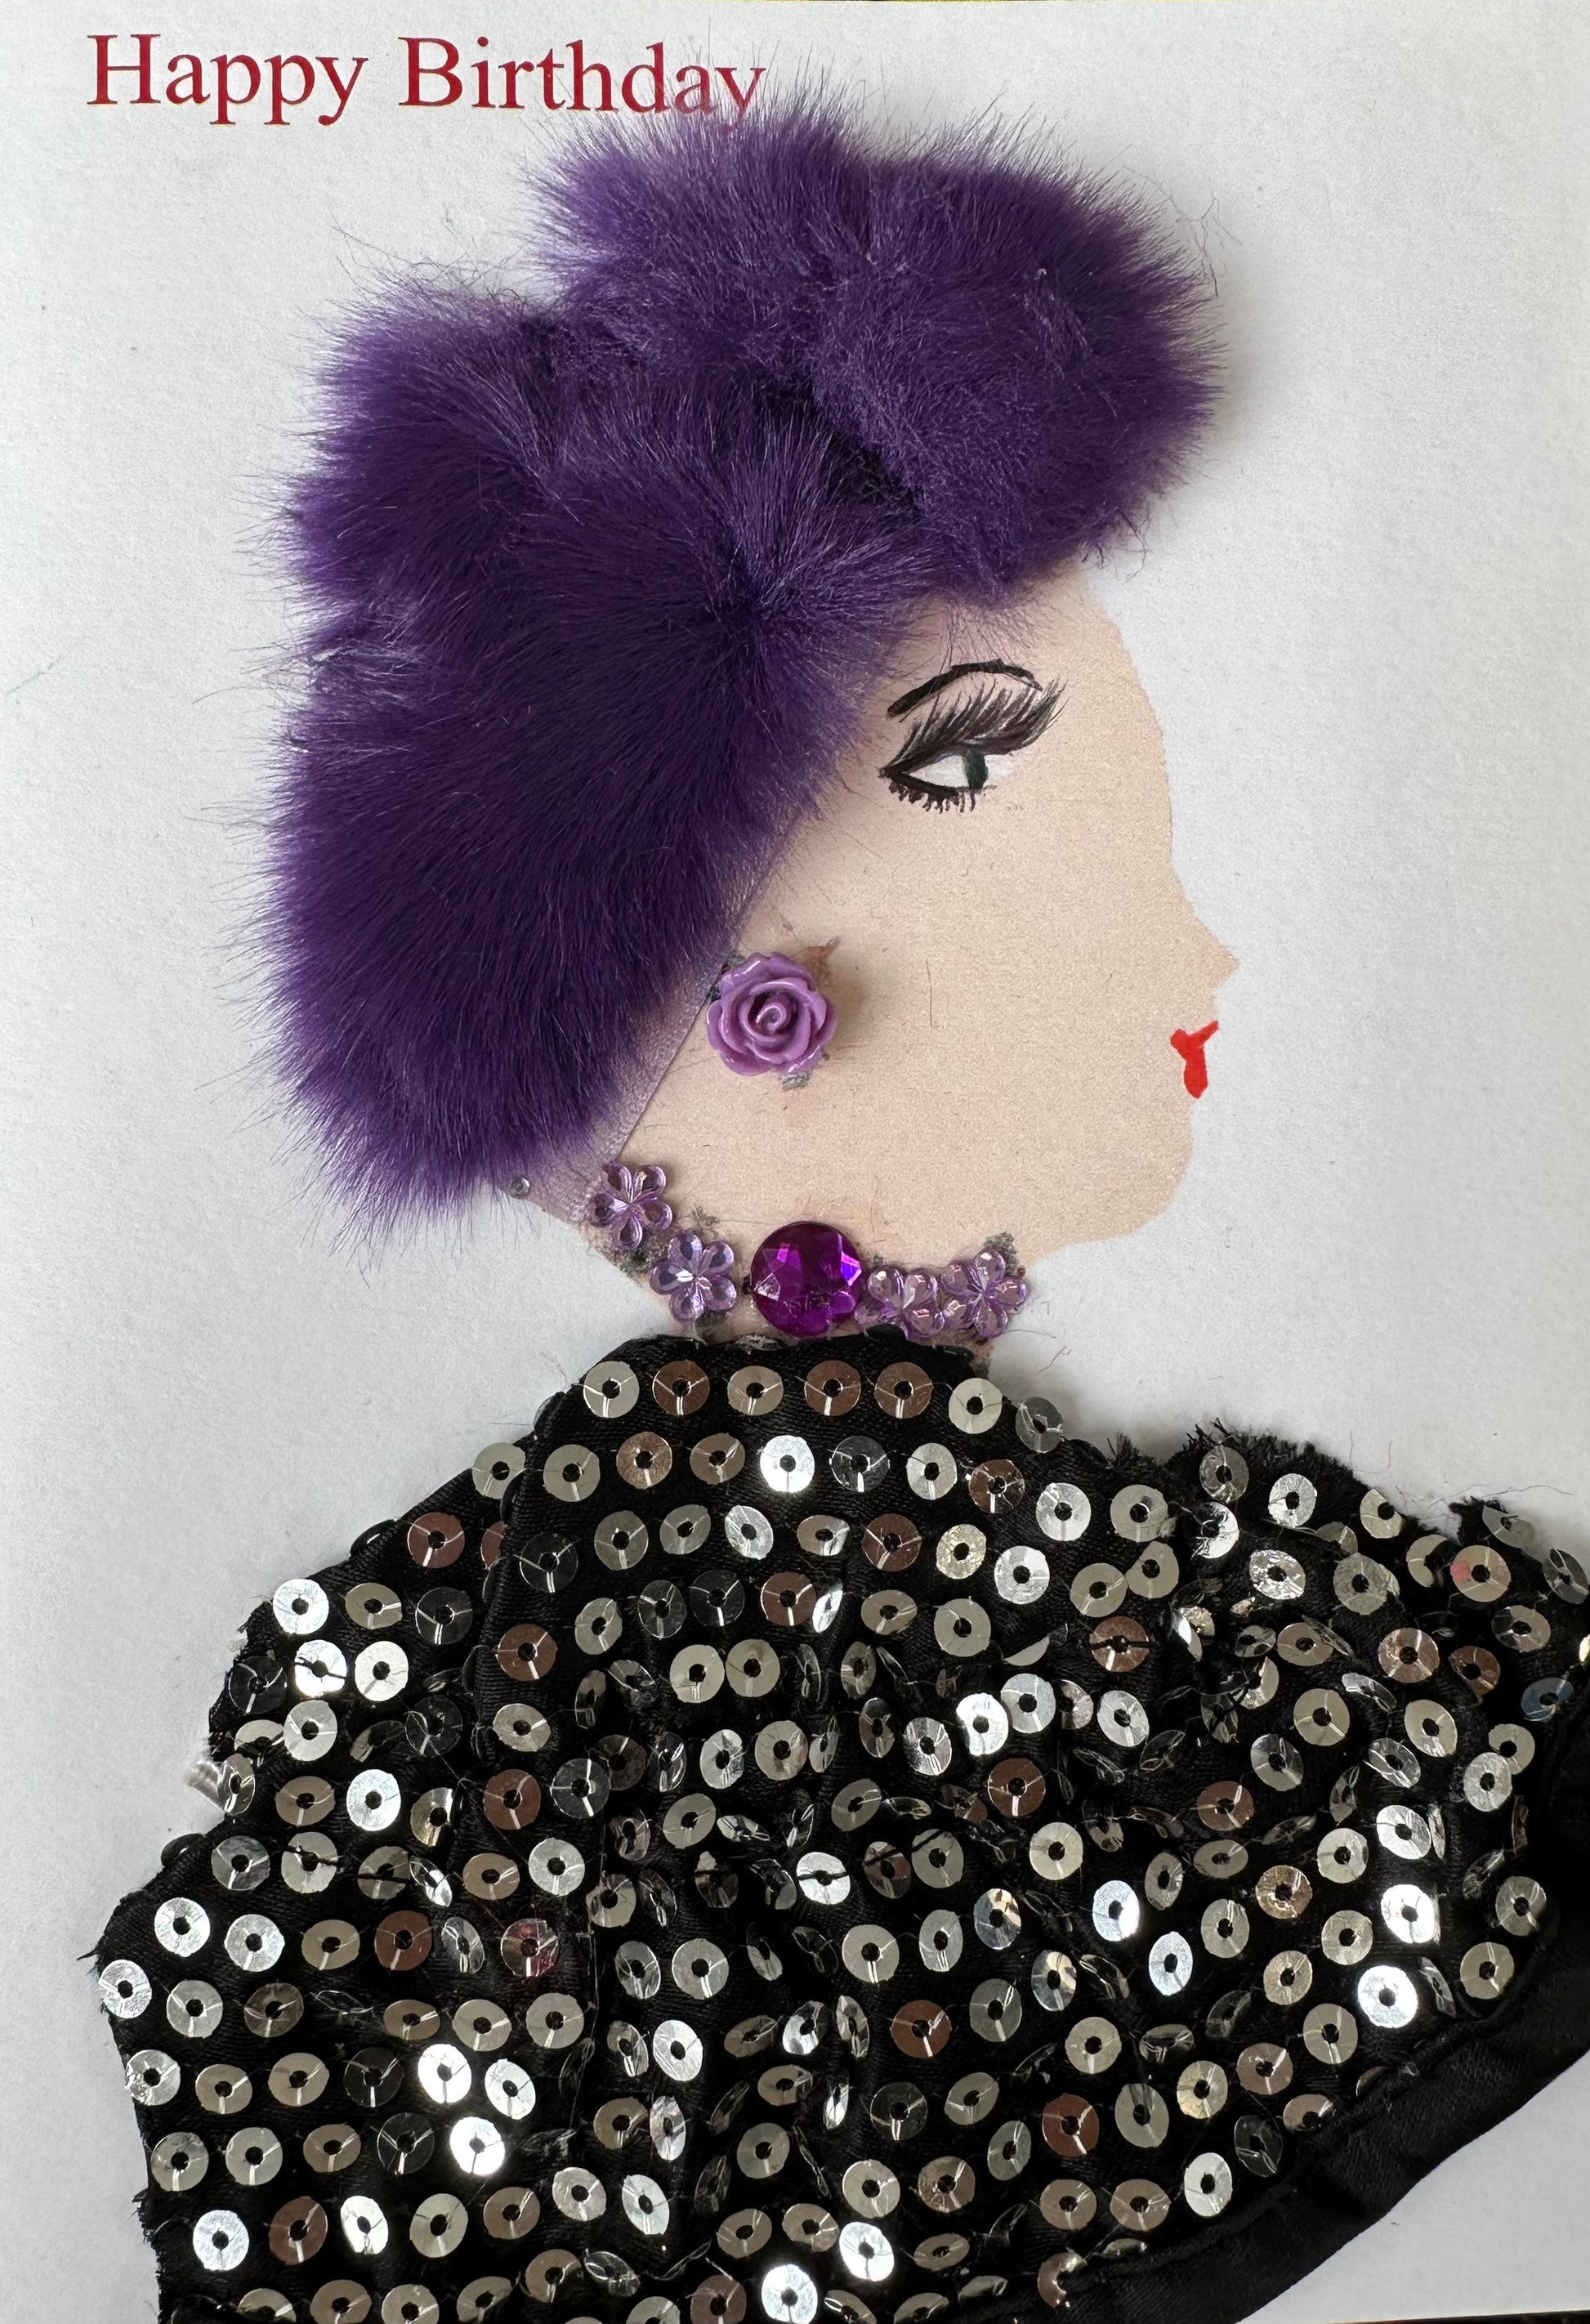 I made this handmade birthday card. The woman, Acton Ashlynn, is dressed in a black blouse with silver sequins. Her hair is a dark purple which matches her purple, flower earrings and necklace. 